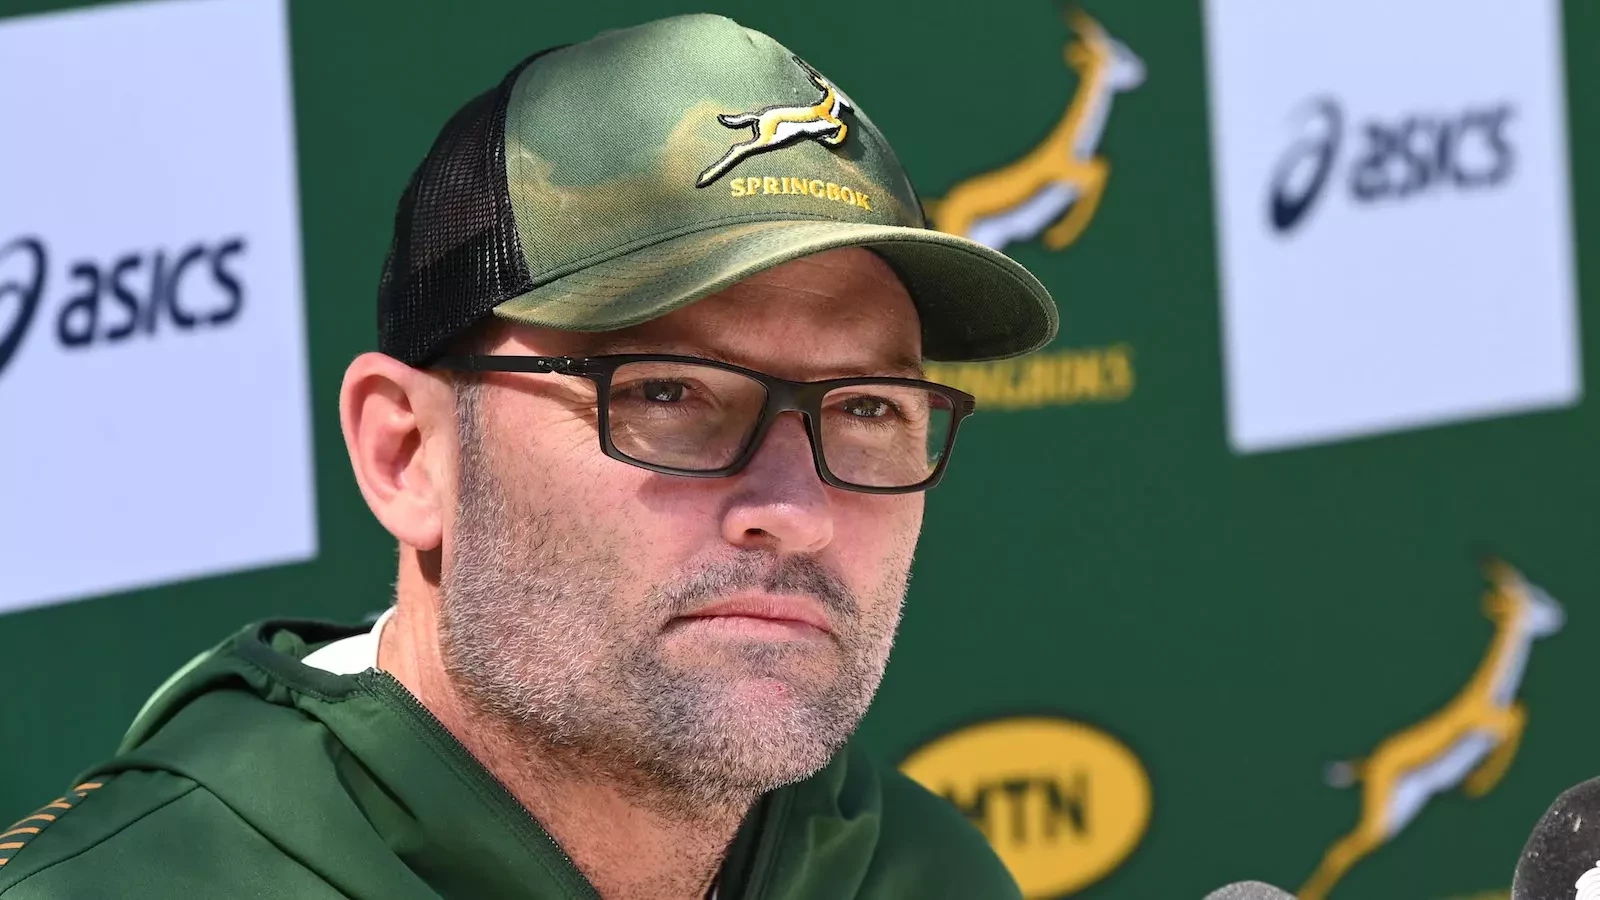 Jacques Nienaber set for Springboks exit after Rugby World Cup 2023 | rugby